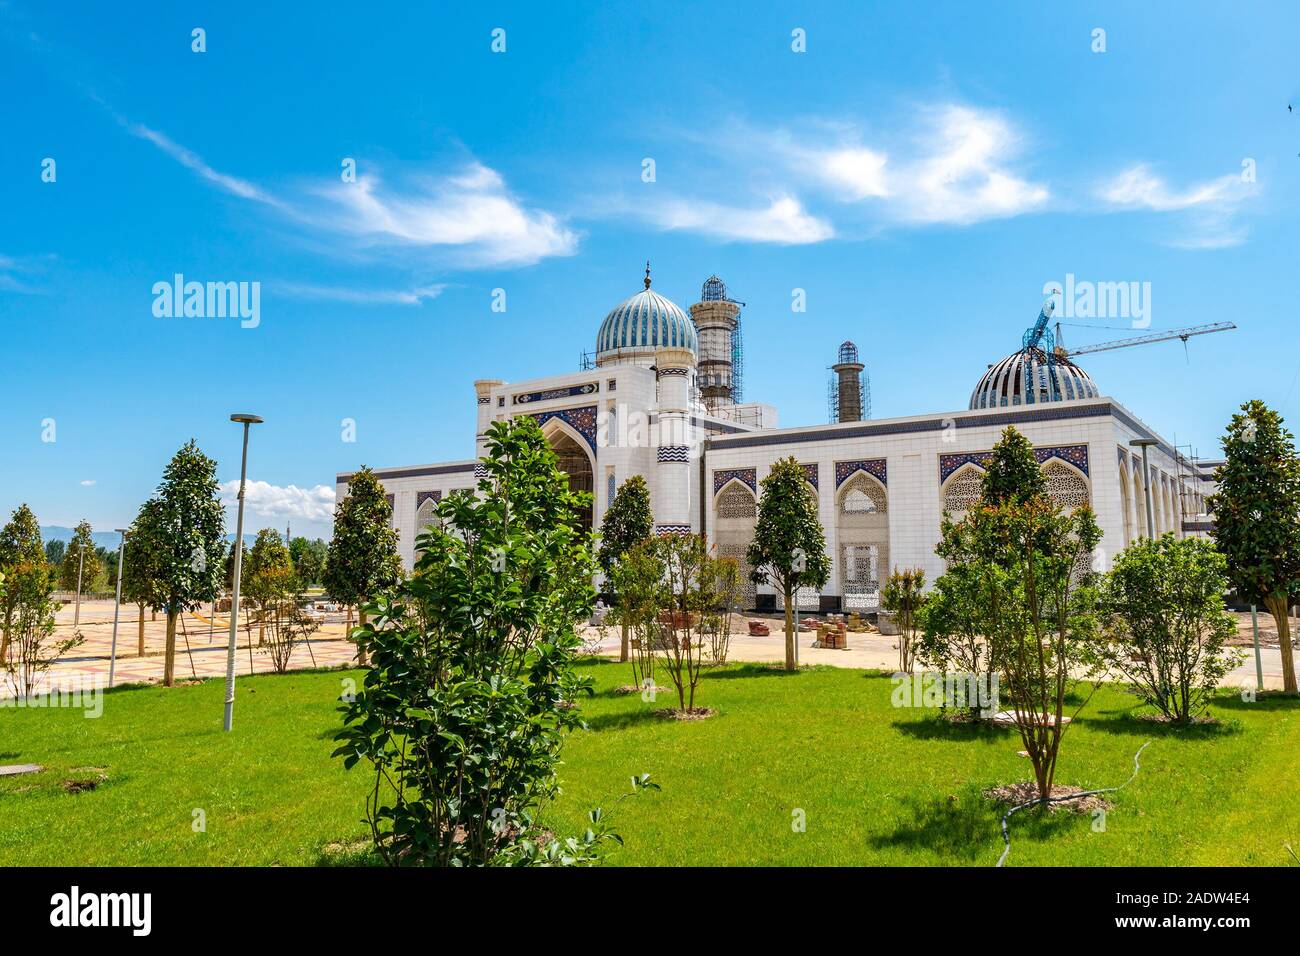 Dushanbe Mosque of Tajikistan Under Construction Picturesque View on a Sunny Blue Sky Day Stock Photo